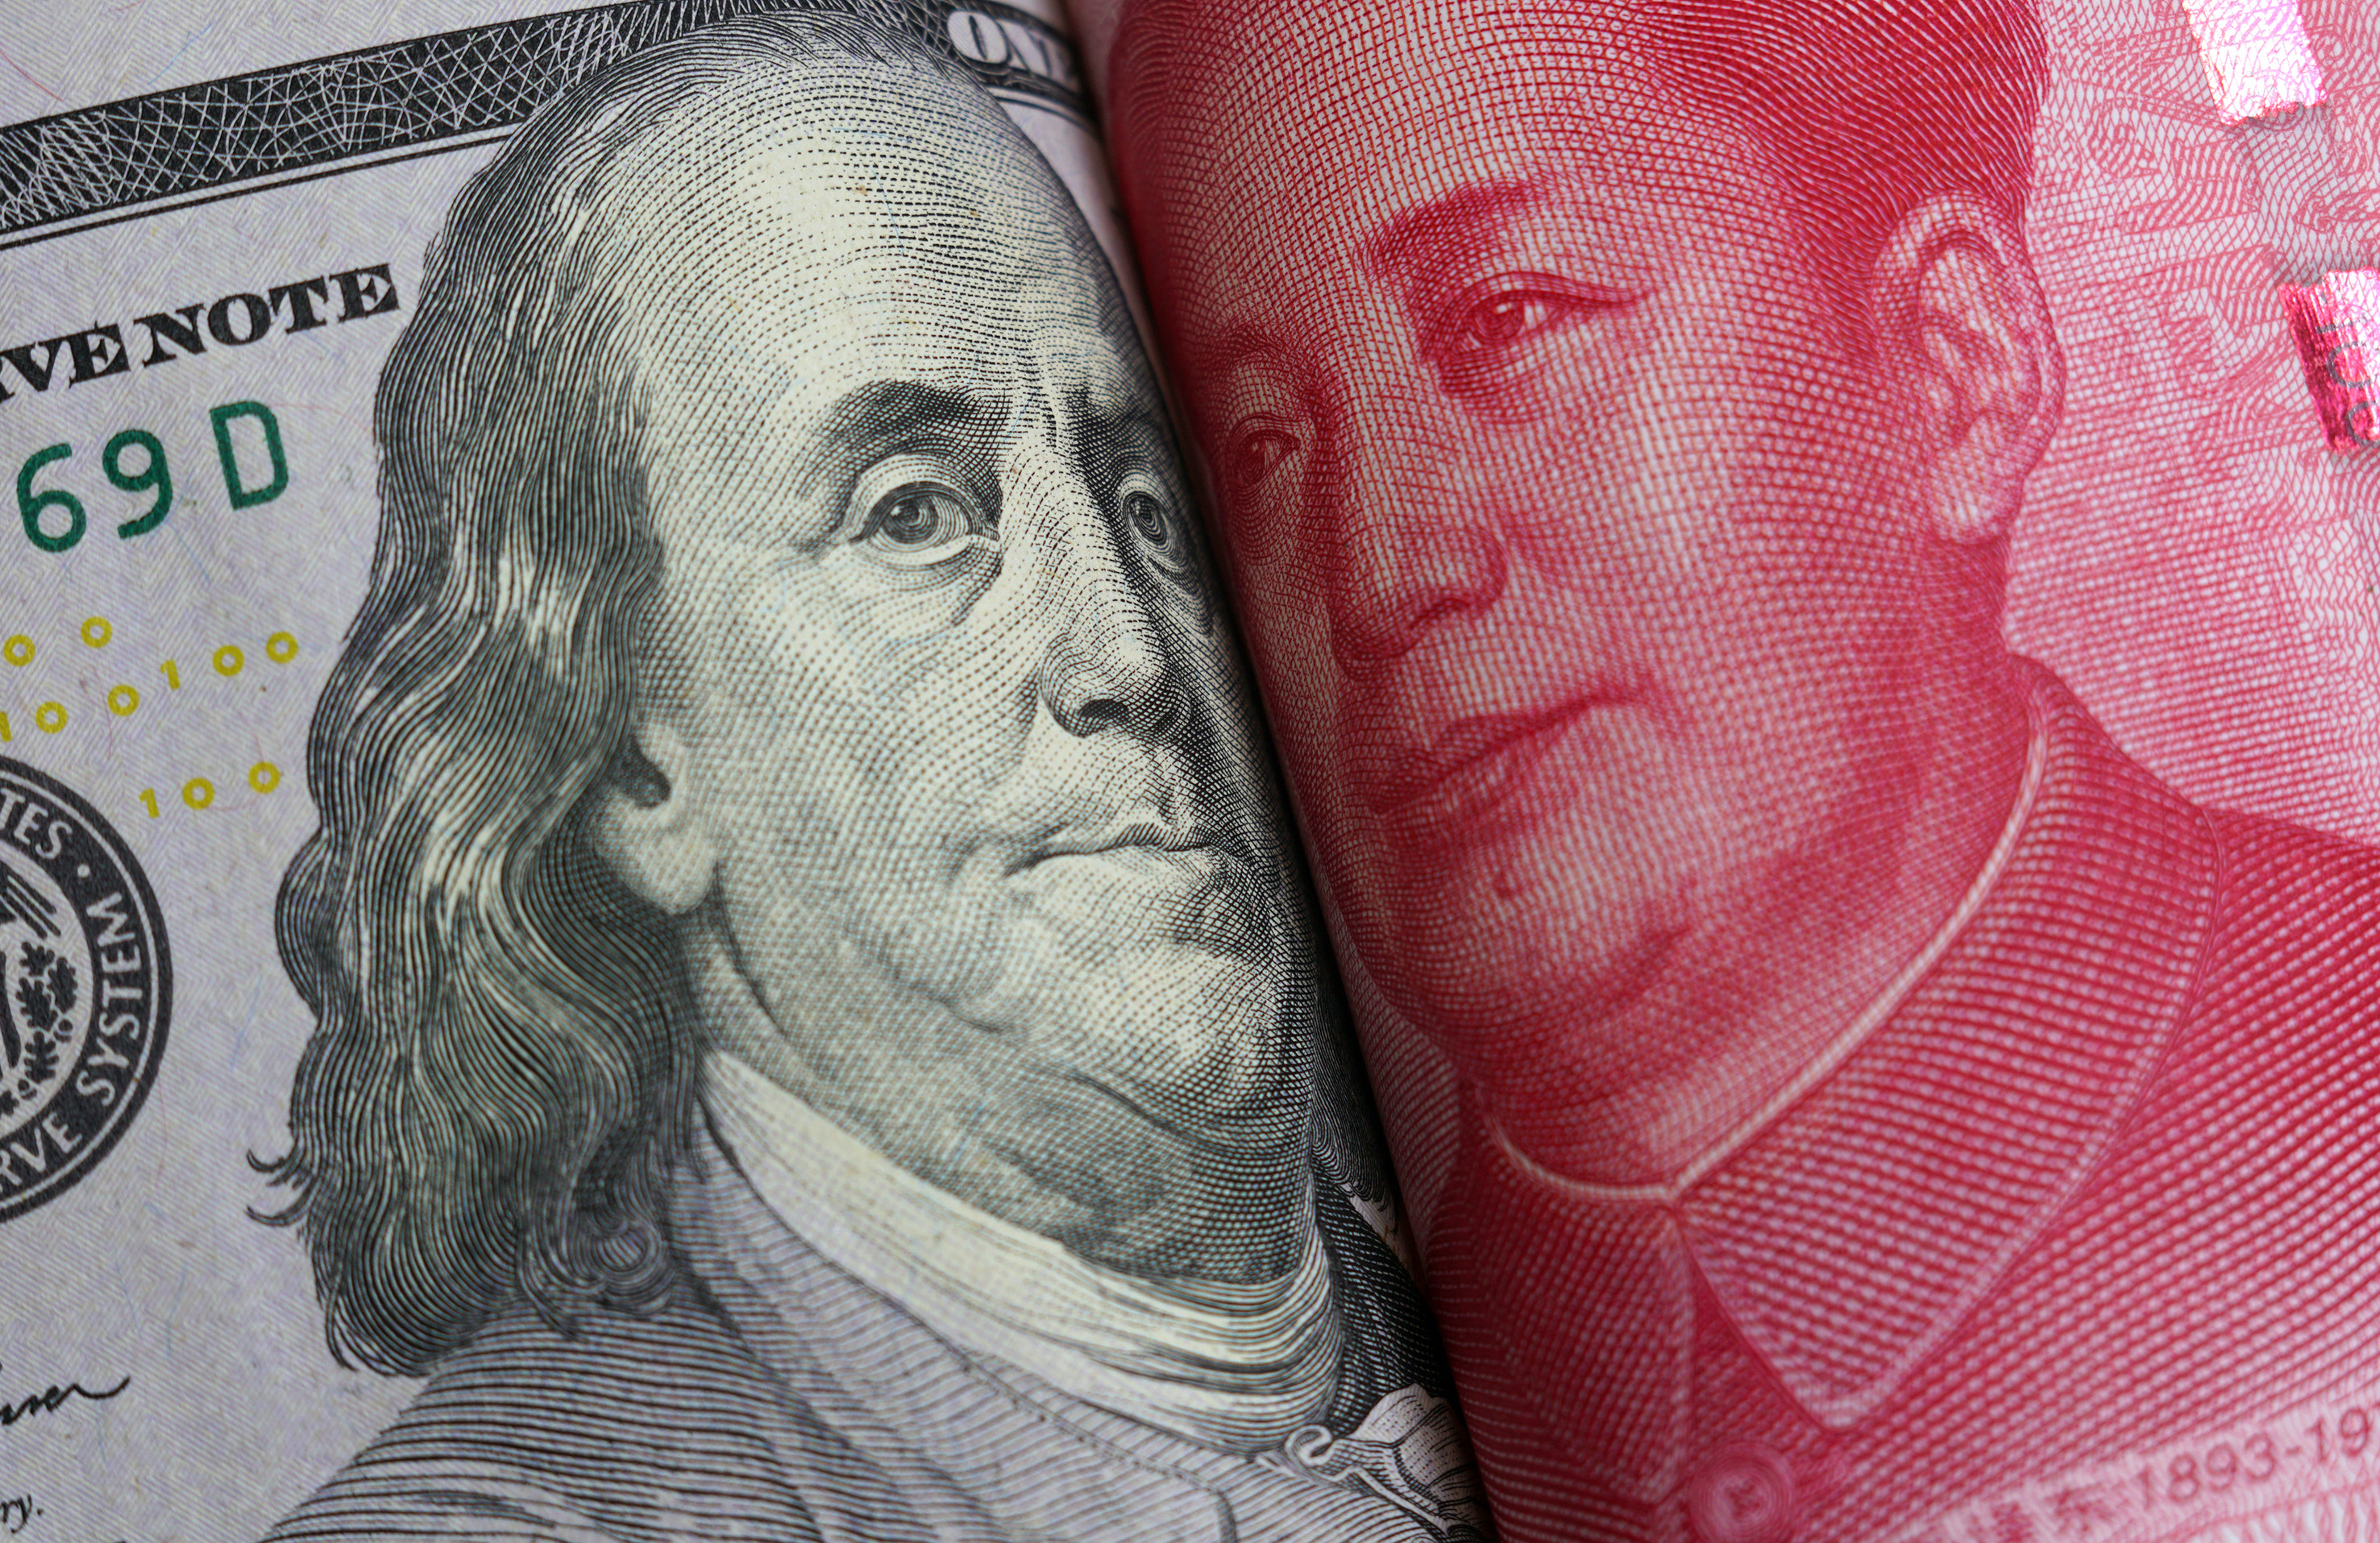 The People’s Bank of China (PBOC) said on Monday that it will cut the amount of foreign exchange deposits banks have to set aside by one percentage point to 8 per cent from May 15. Photo: Shutterstock